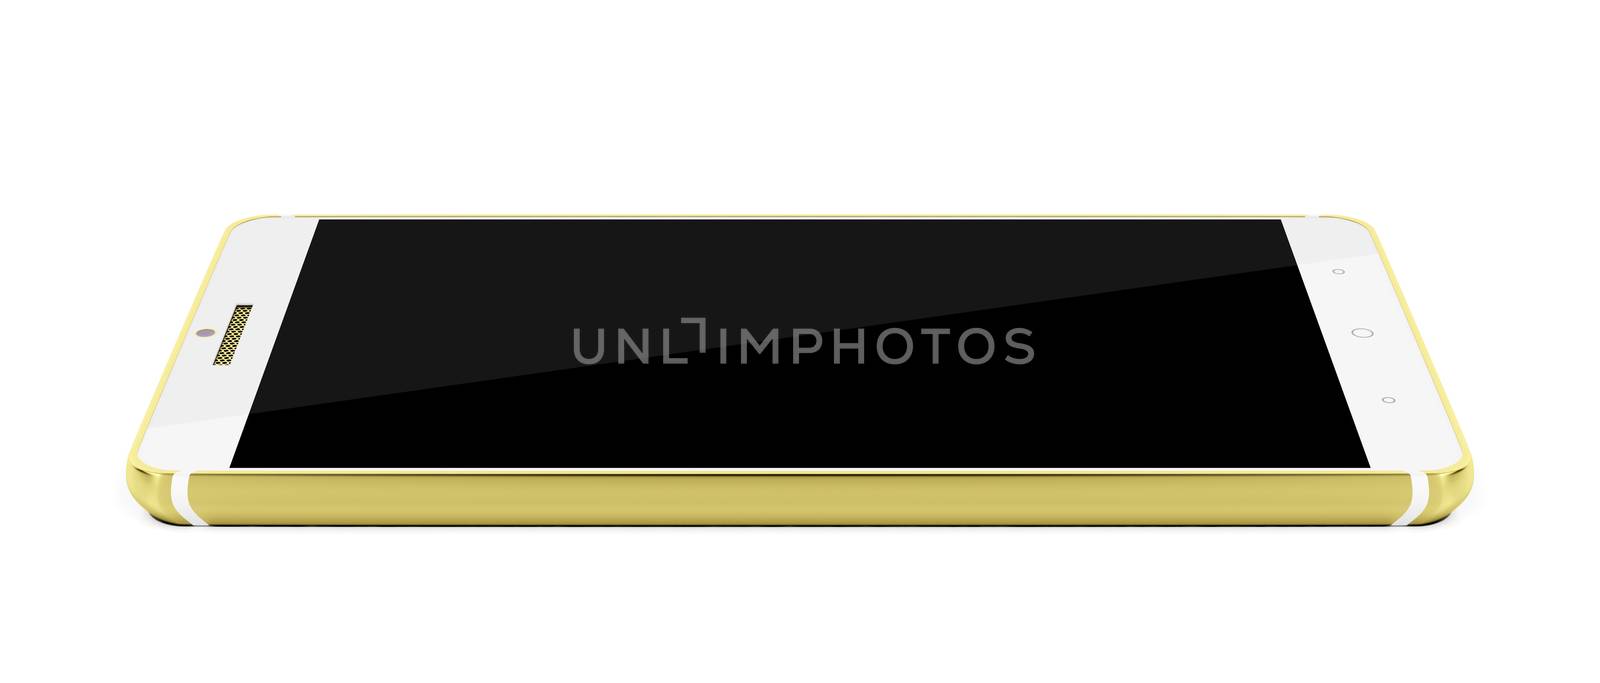 Modern white and gold colored smartphone on white background